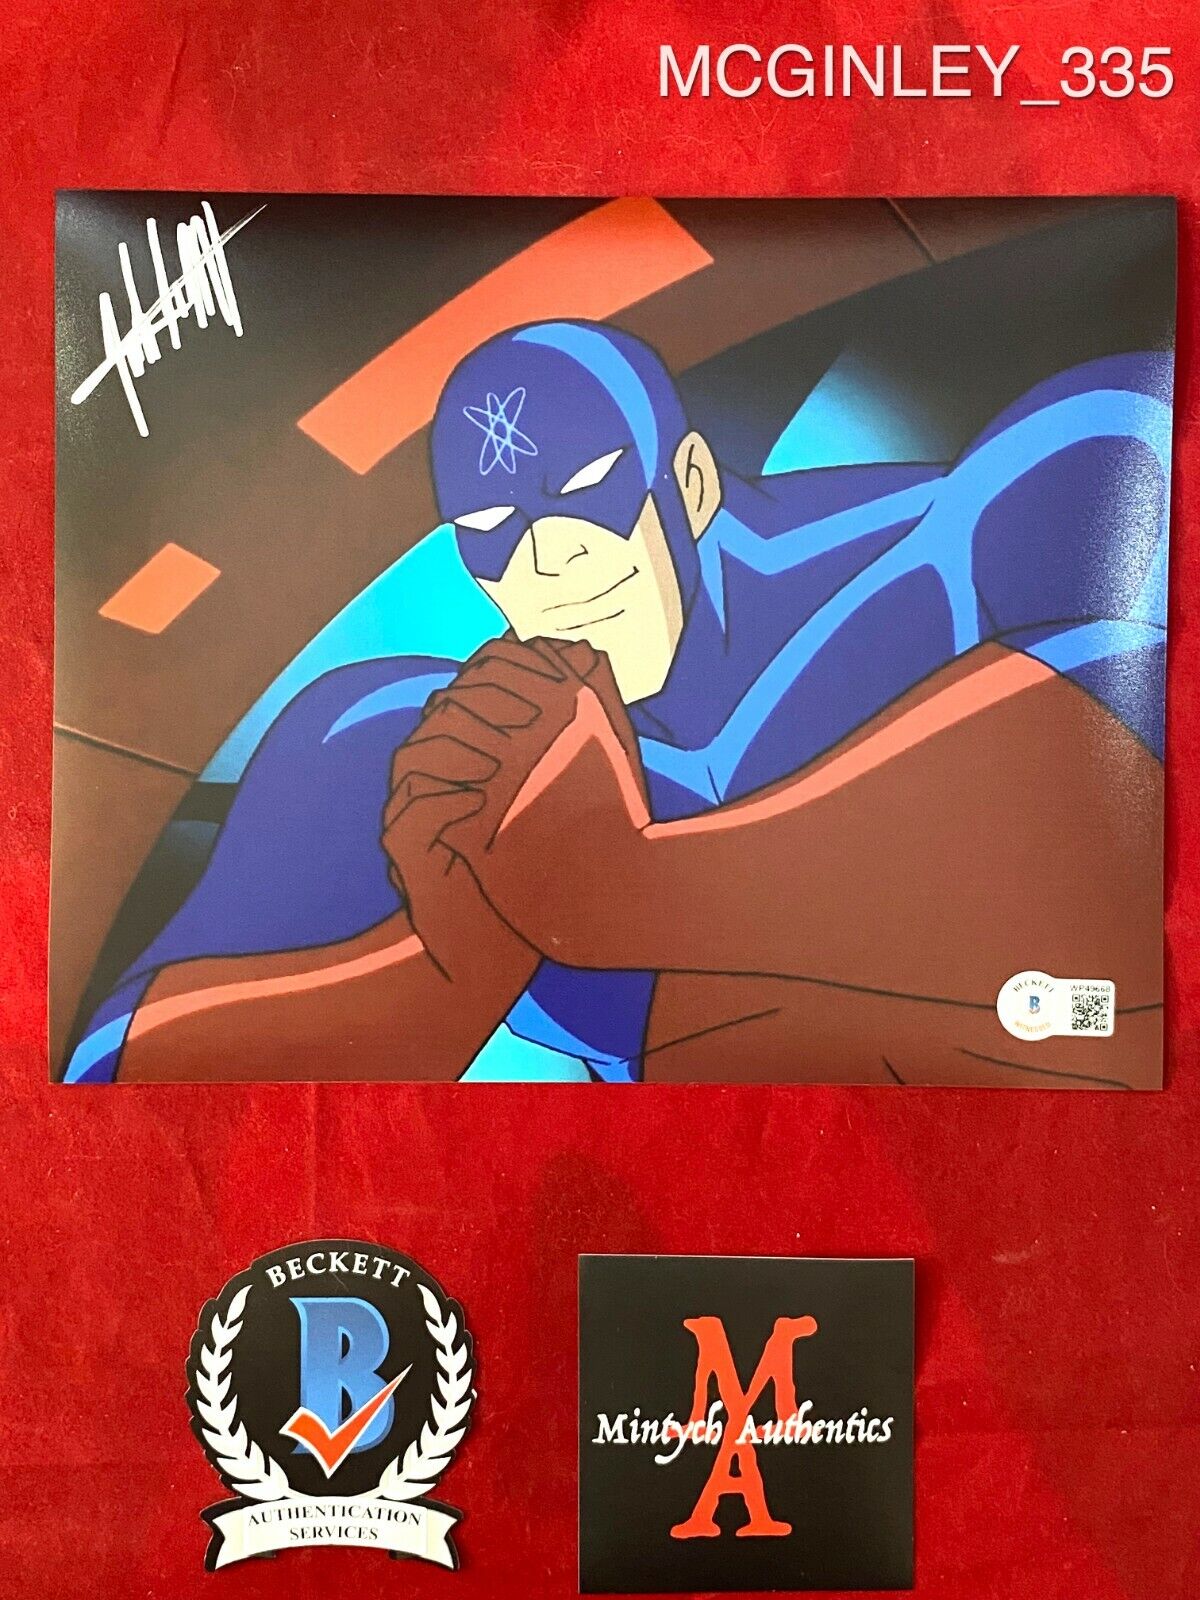 JOHN MCGINLEY AUTOGRAPHED SIGNED 8x10 Photo Poster painting! JUSTICE LEAGUE! BECKETT COA!